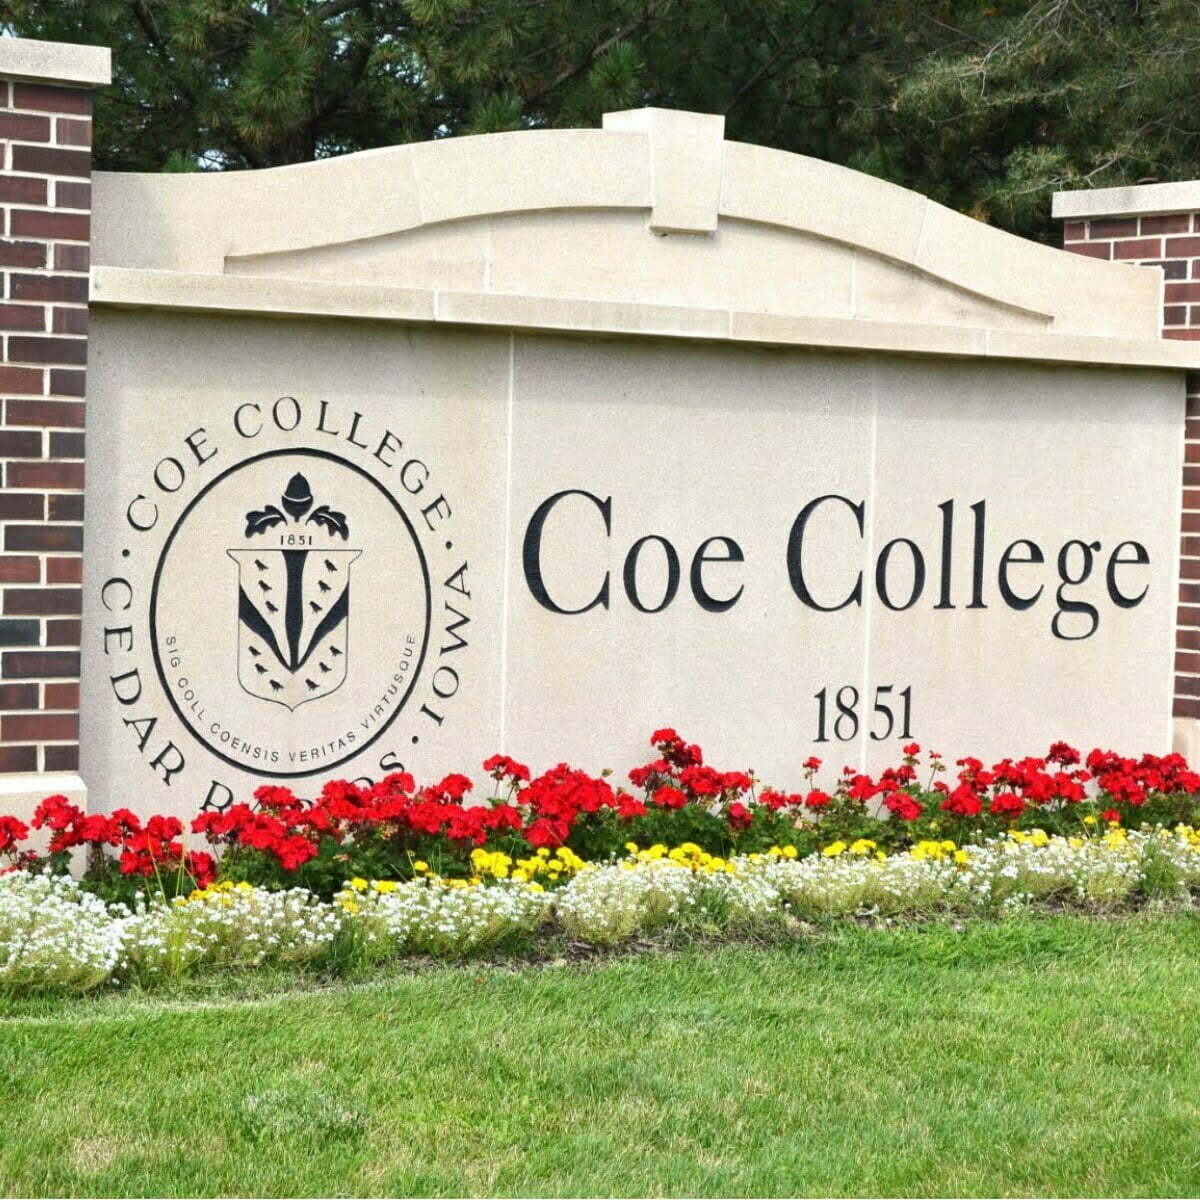 Global Leadership Scholarship 2023 at Coe College in USA